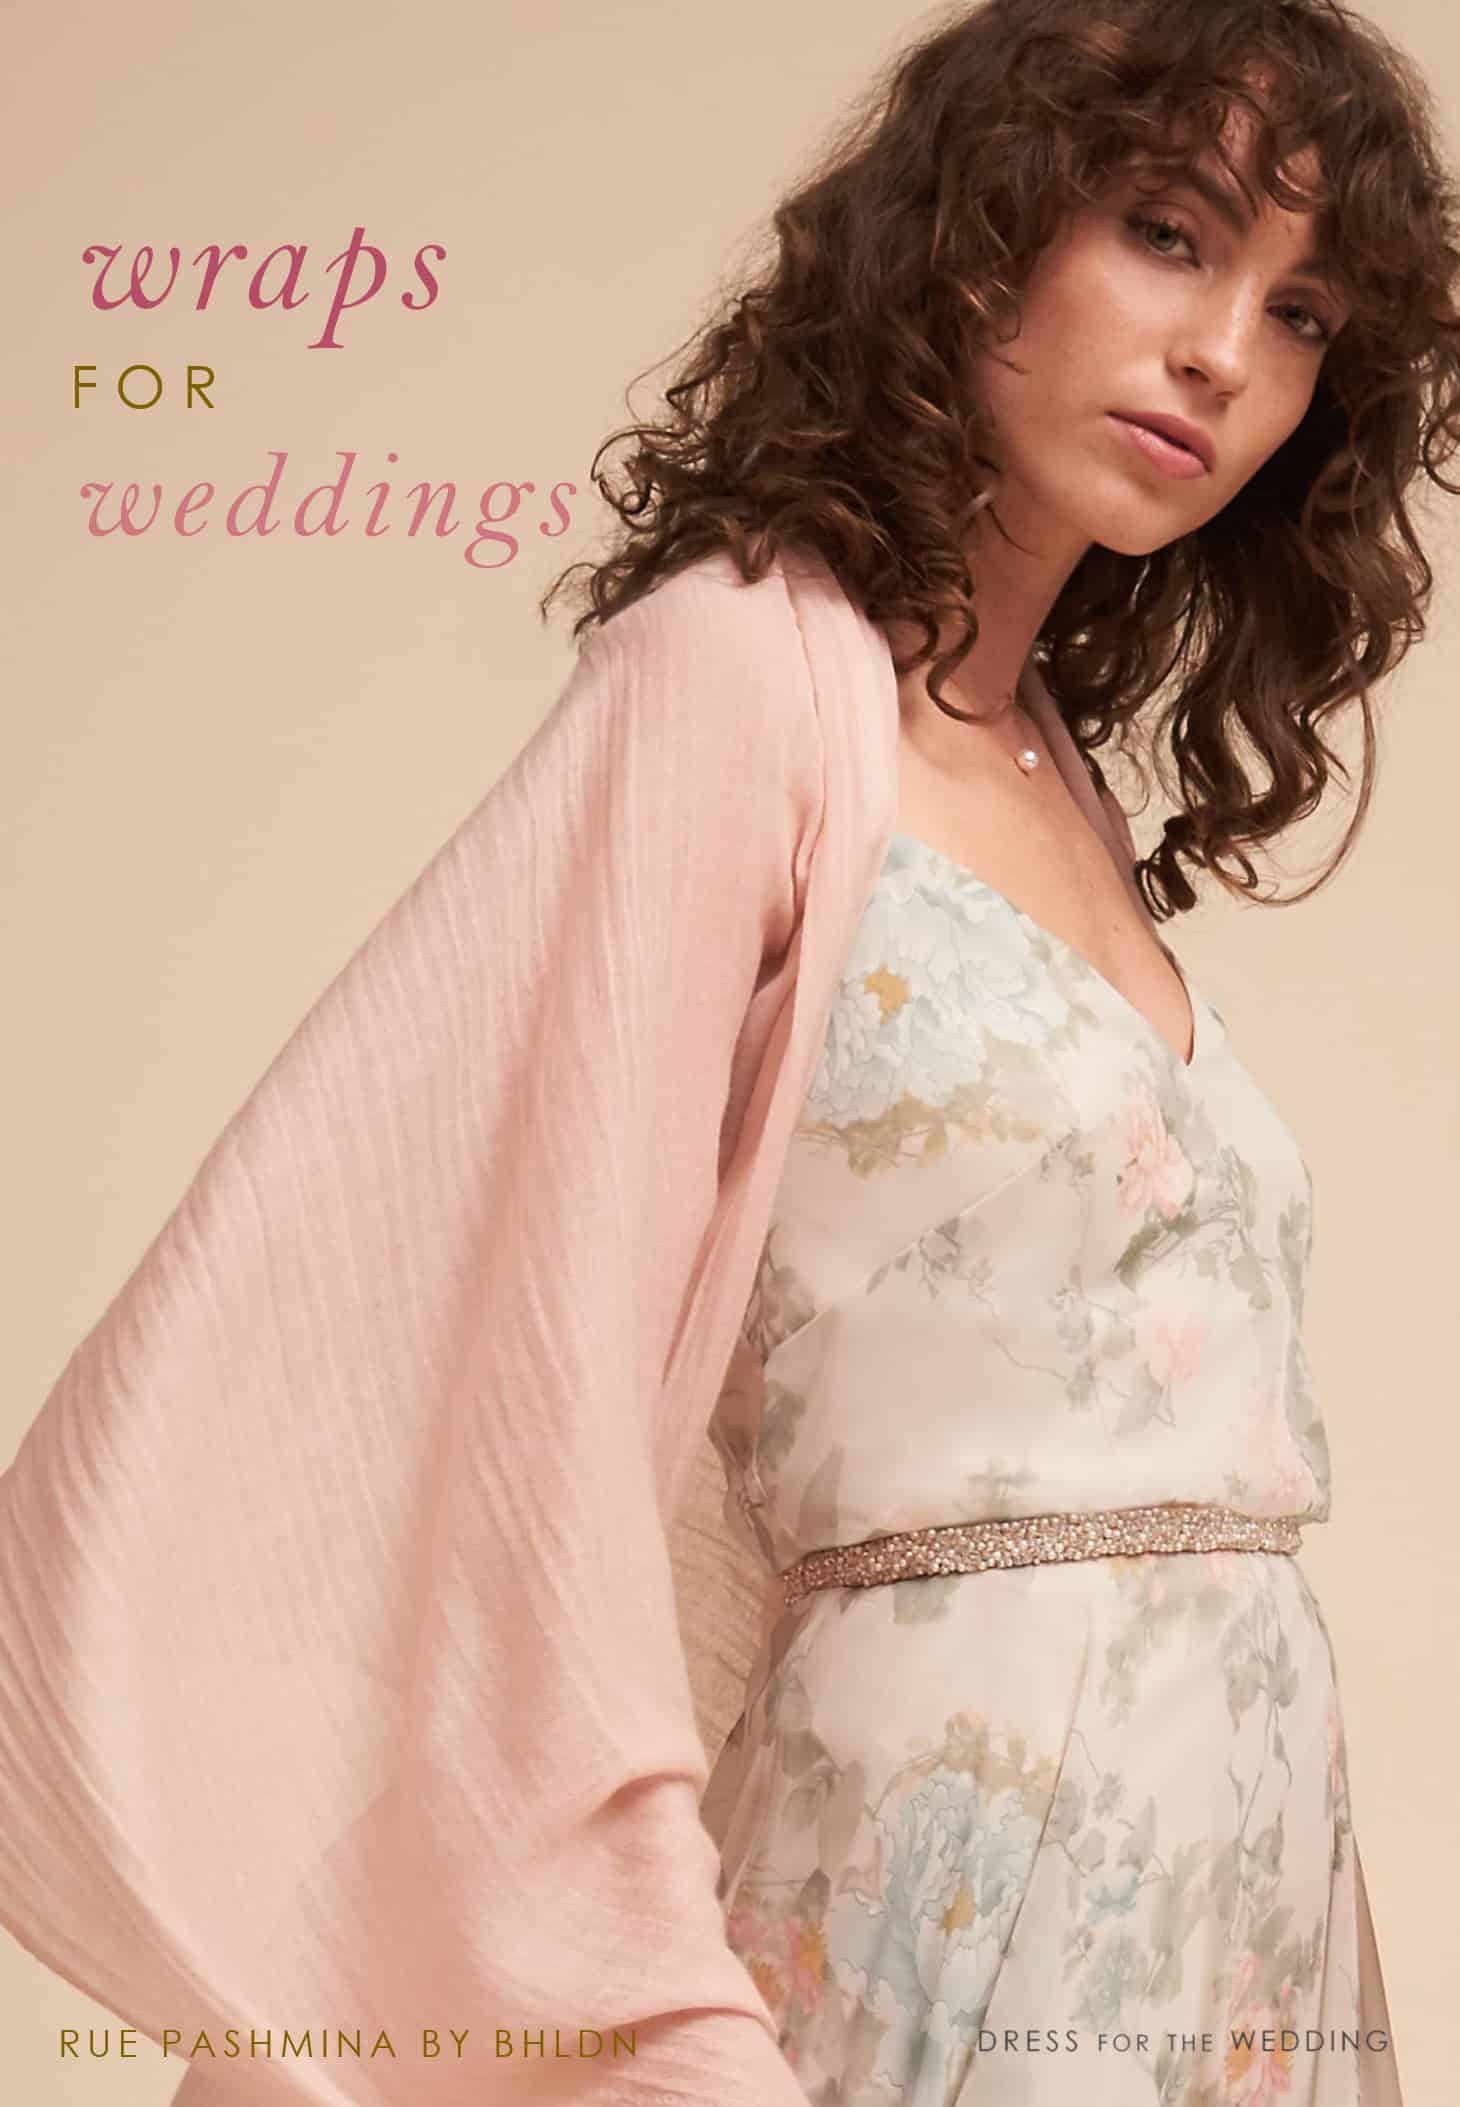 Wraps for Weddings Shawls and CoverUps for Guests Bridesmaids and  Mothers  Dress for the Wedding  Dress with shawl Cover up for dress  formal Mothers dresses